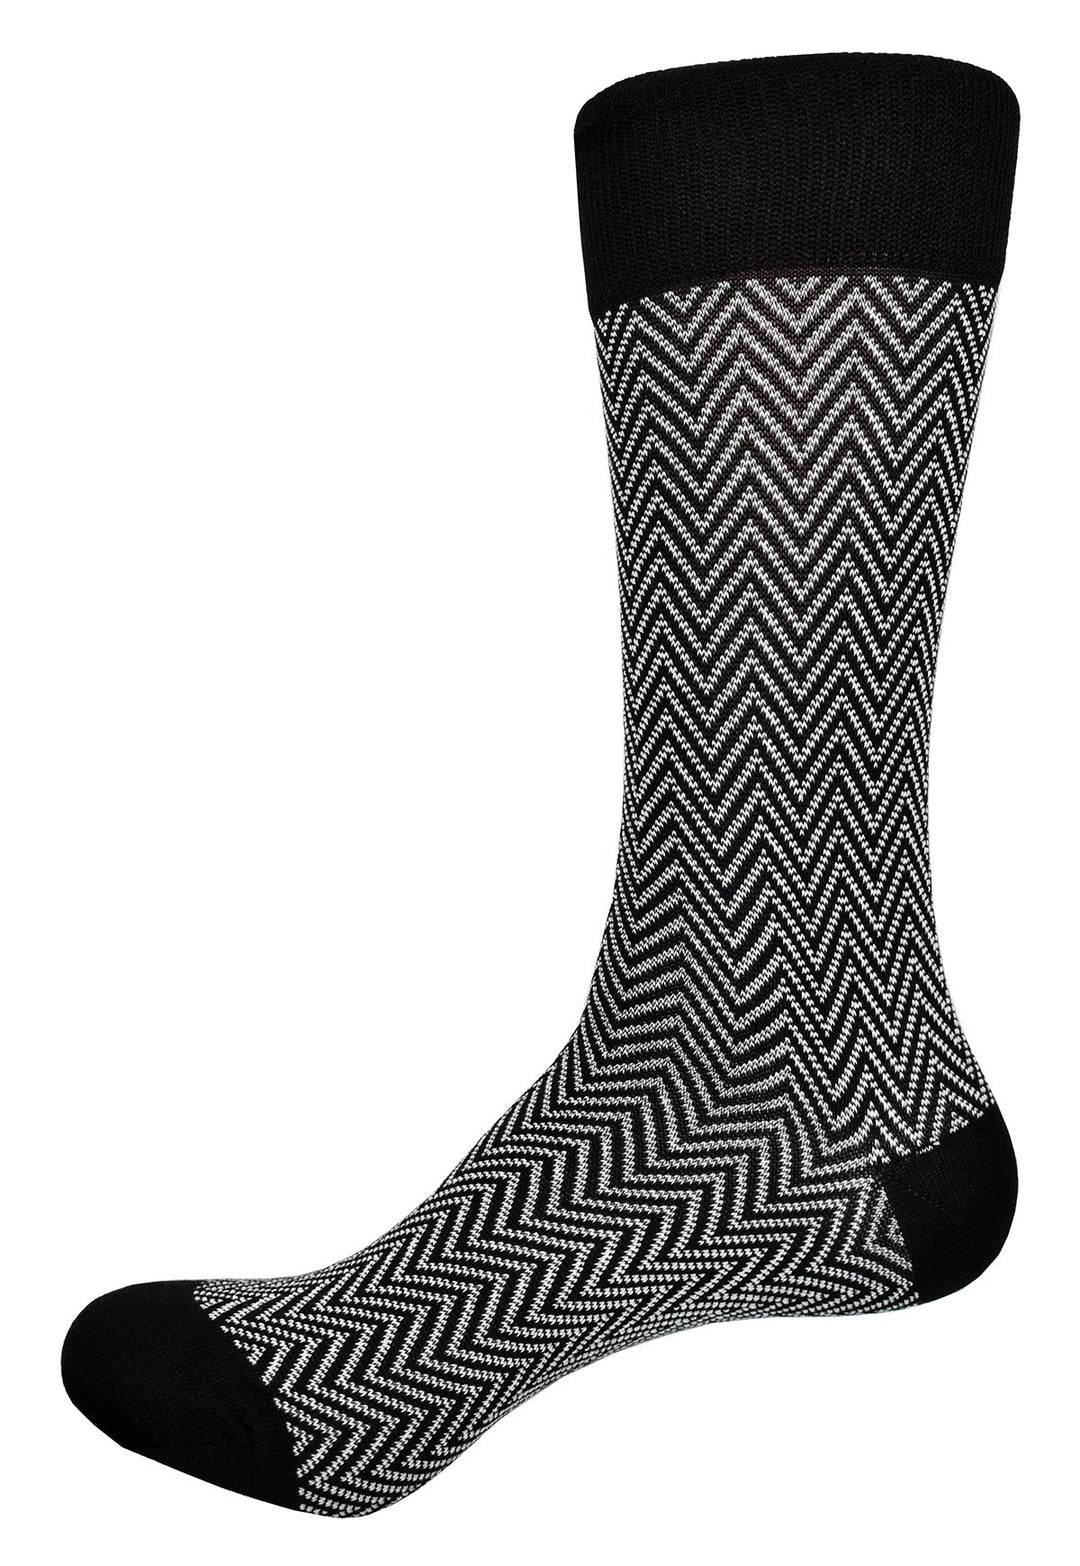 Always sharp looking black and white in a timeless chevron pattern.  Soft mercerized cotton. Classic timeless pattern. Mid calf height. Fits sizes 9 - 12.  Sock by Marcello Sport